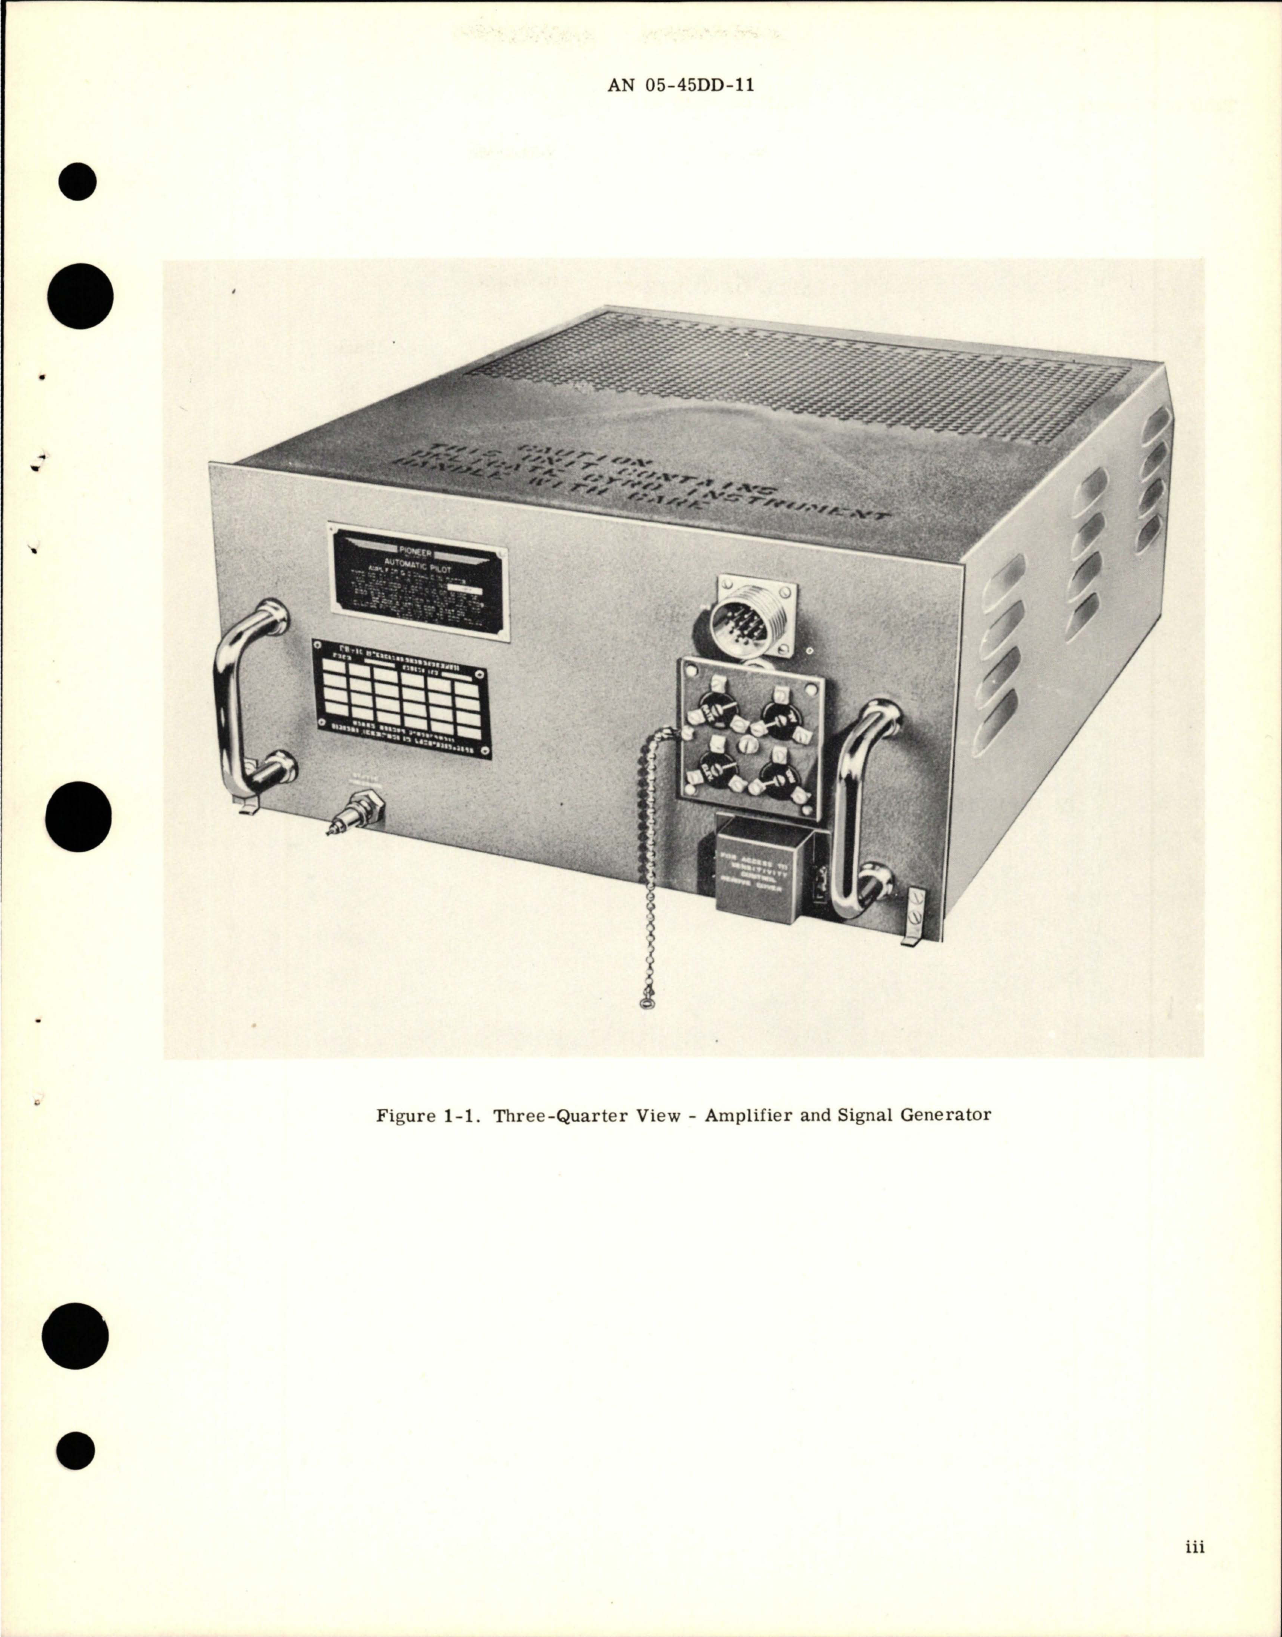 Sample page 5 from AirCorps Library document: Overhaul Instructions for Amplifier and Signal Generator - Parts 15406-6-C-4, 15406-6-D-4, 15406-6-E-4 